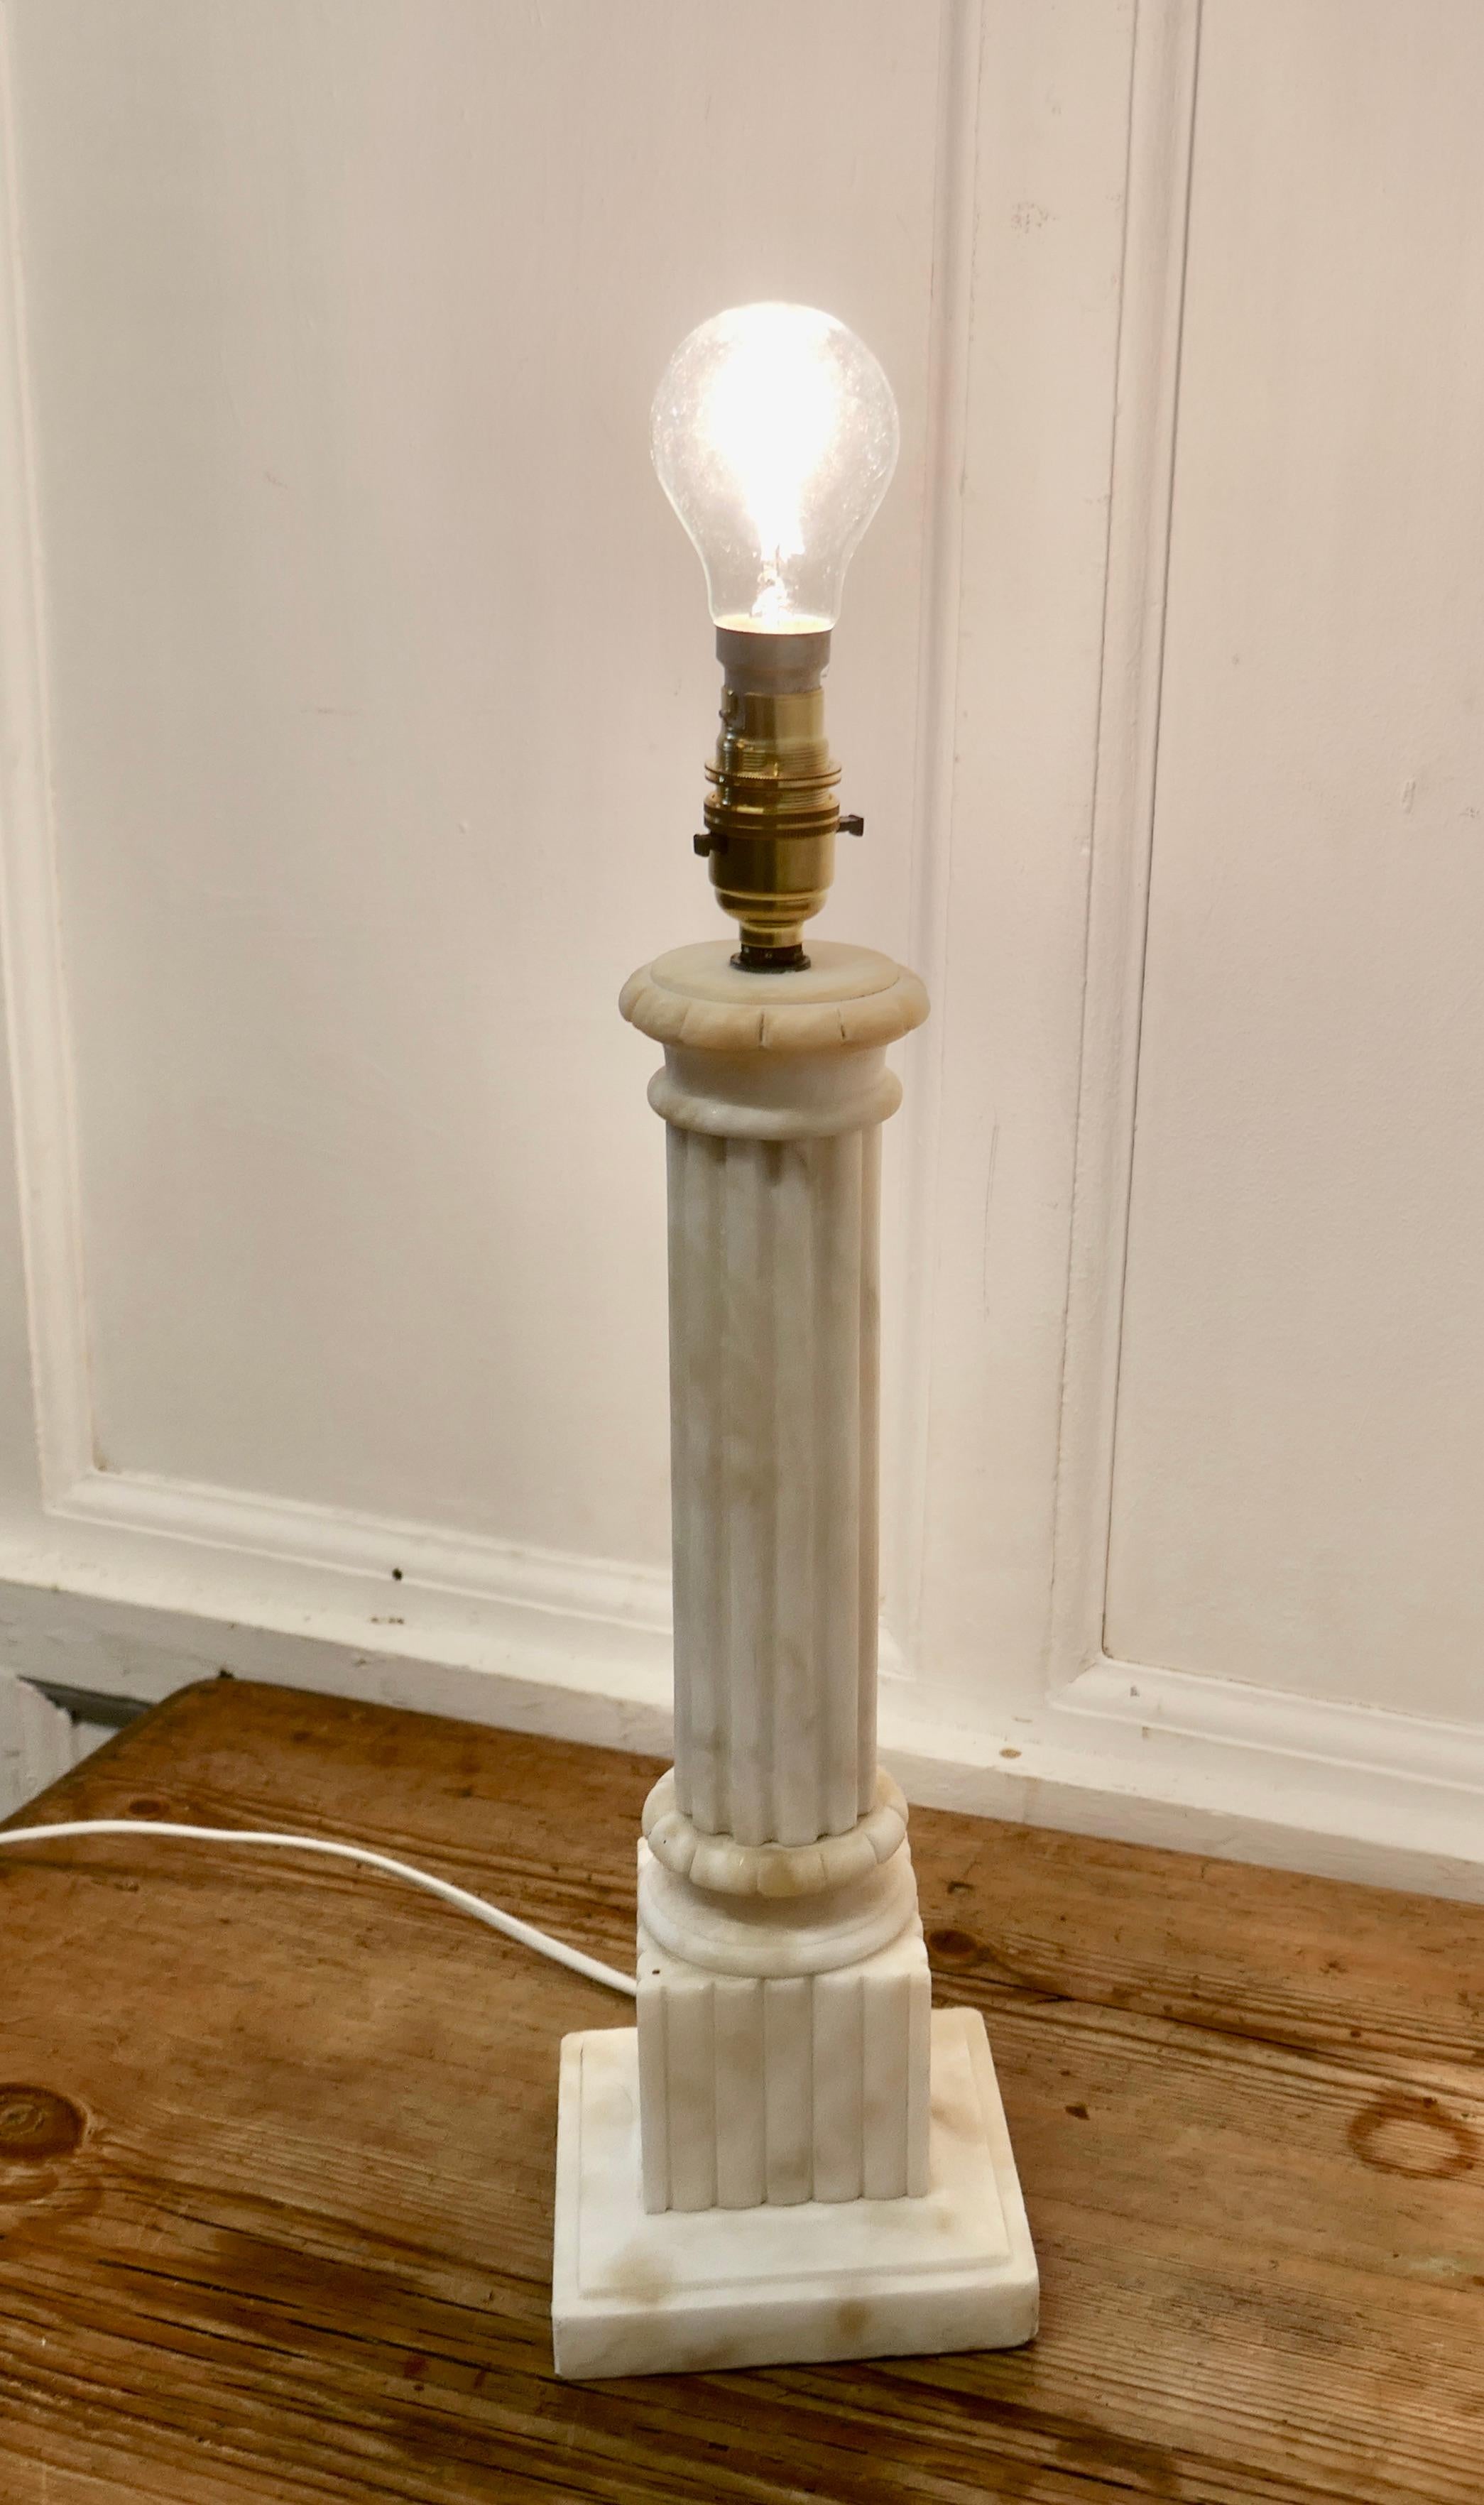 White marble Corinthian column table lamp

This is heavy piece it is made in solid marble, the lamp has a single fluted marble Corinthian style columns set on a marble base
This is a very attractive piece and heavy the marble has slight grey and